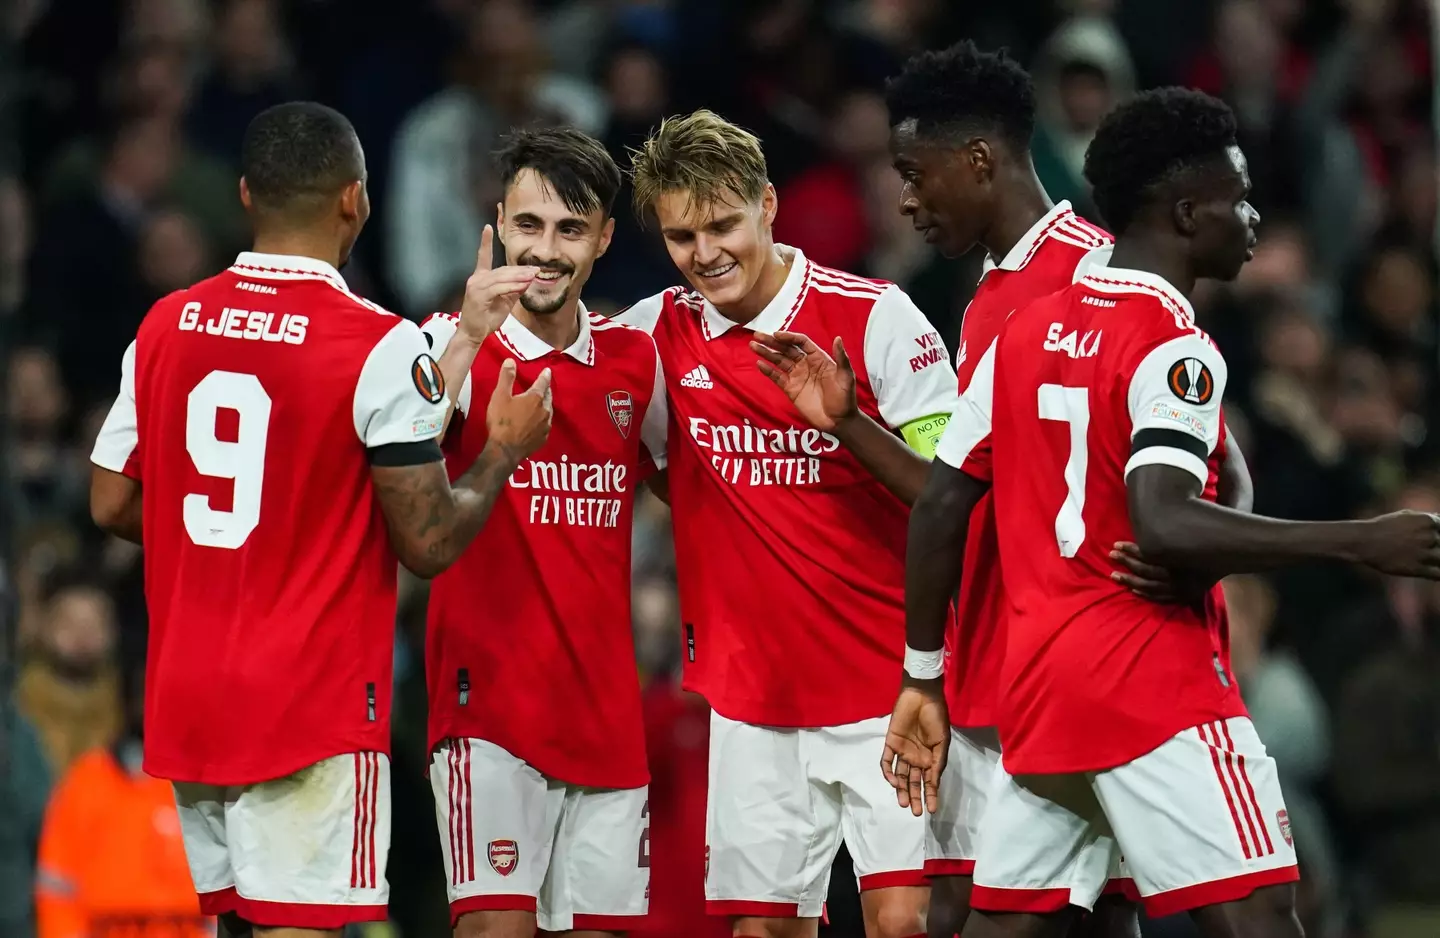 Arsenal players following Thursday's 3-0 victory over Bodo/Glimt. (Image